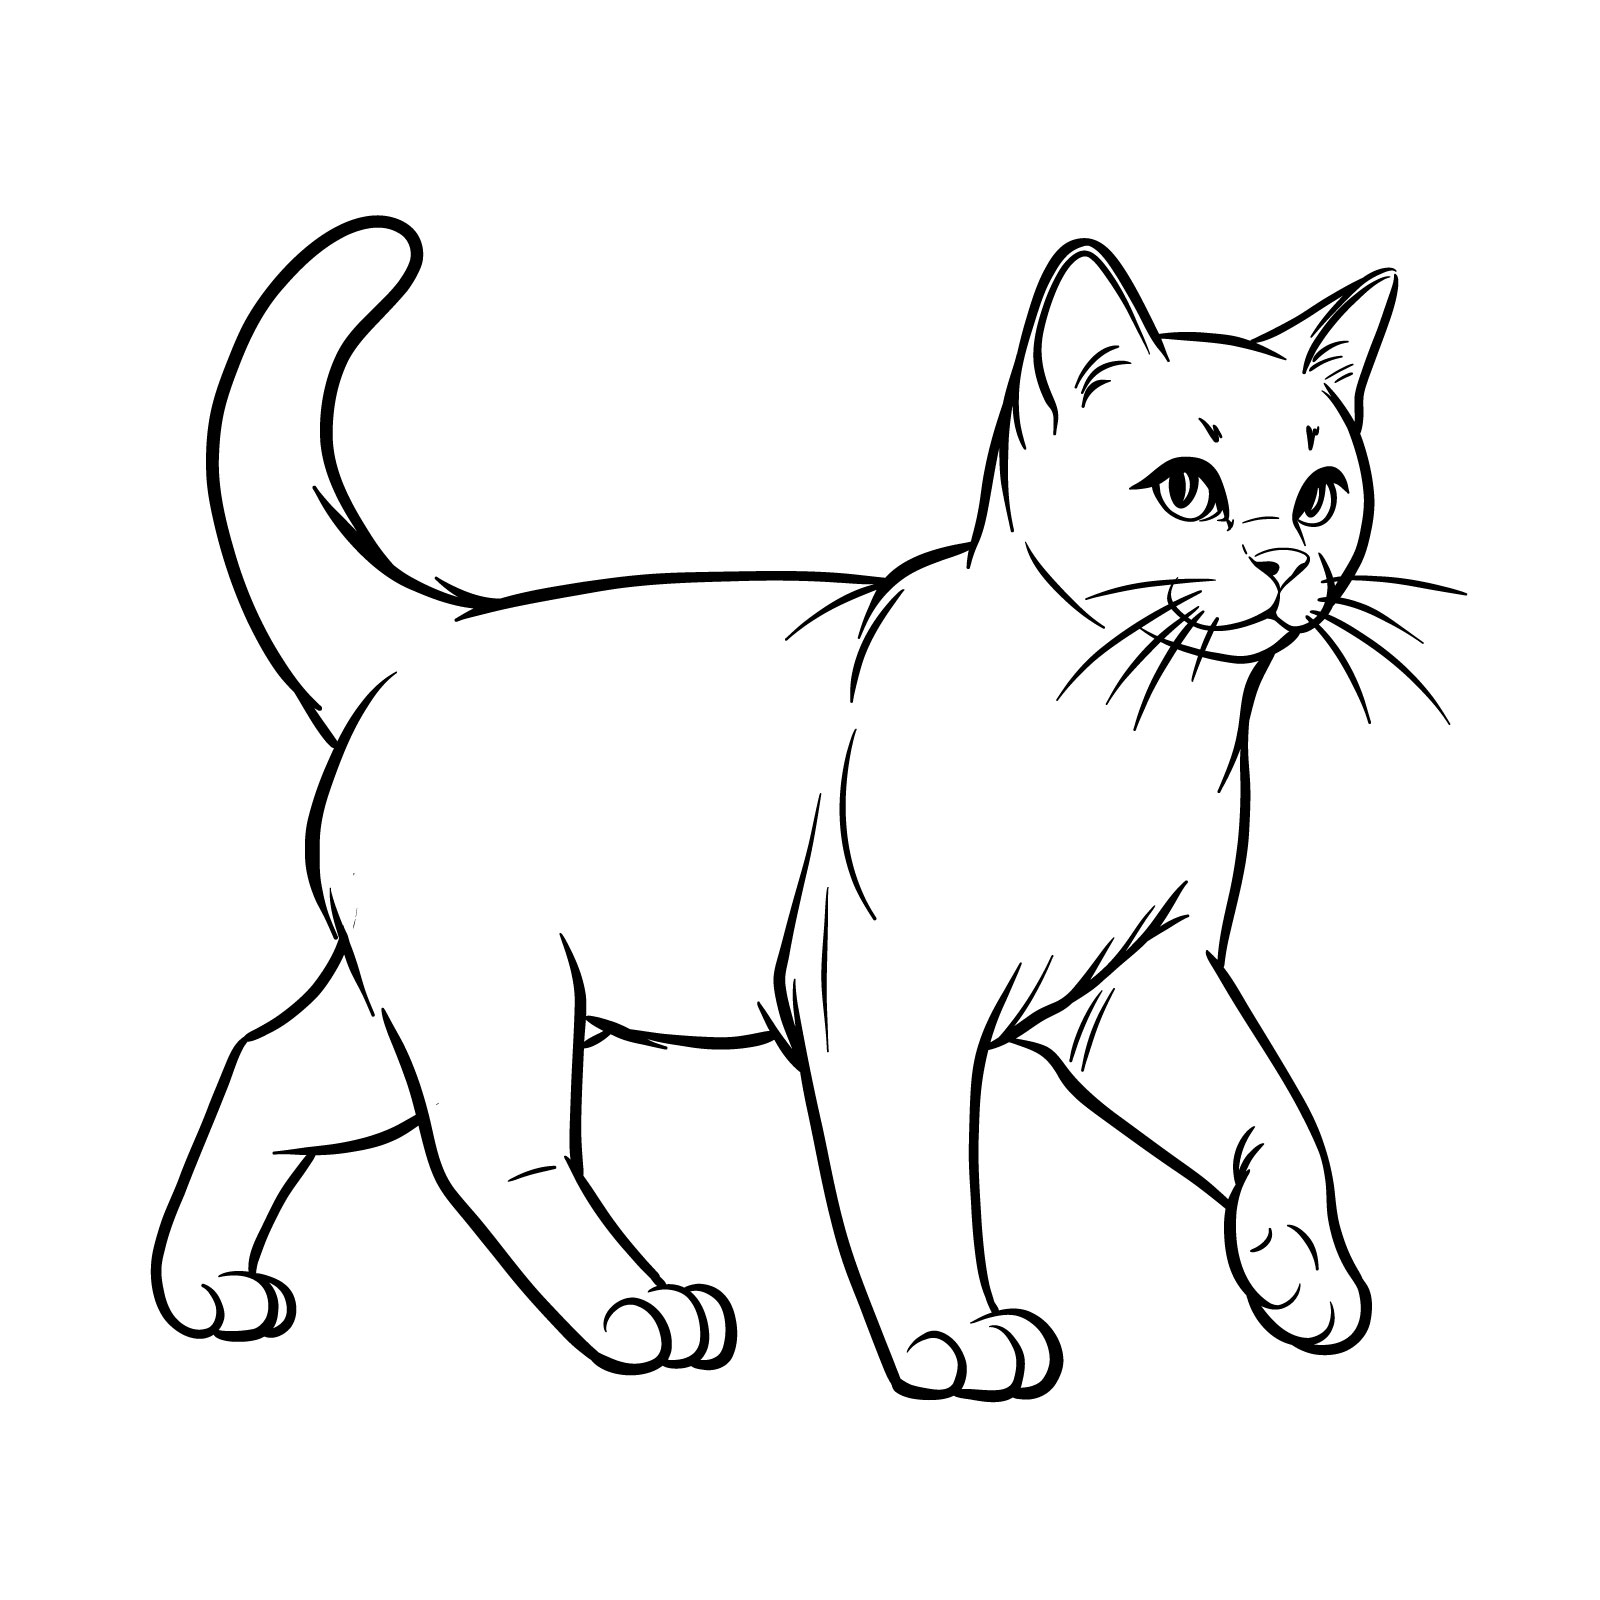 How to Draw a Walking Cat - Easy Step-by-Step Guide